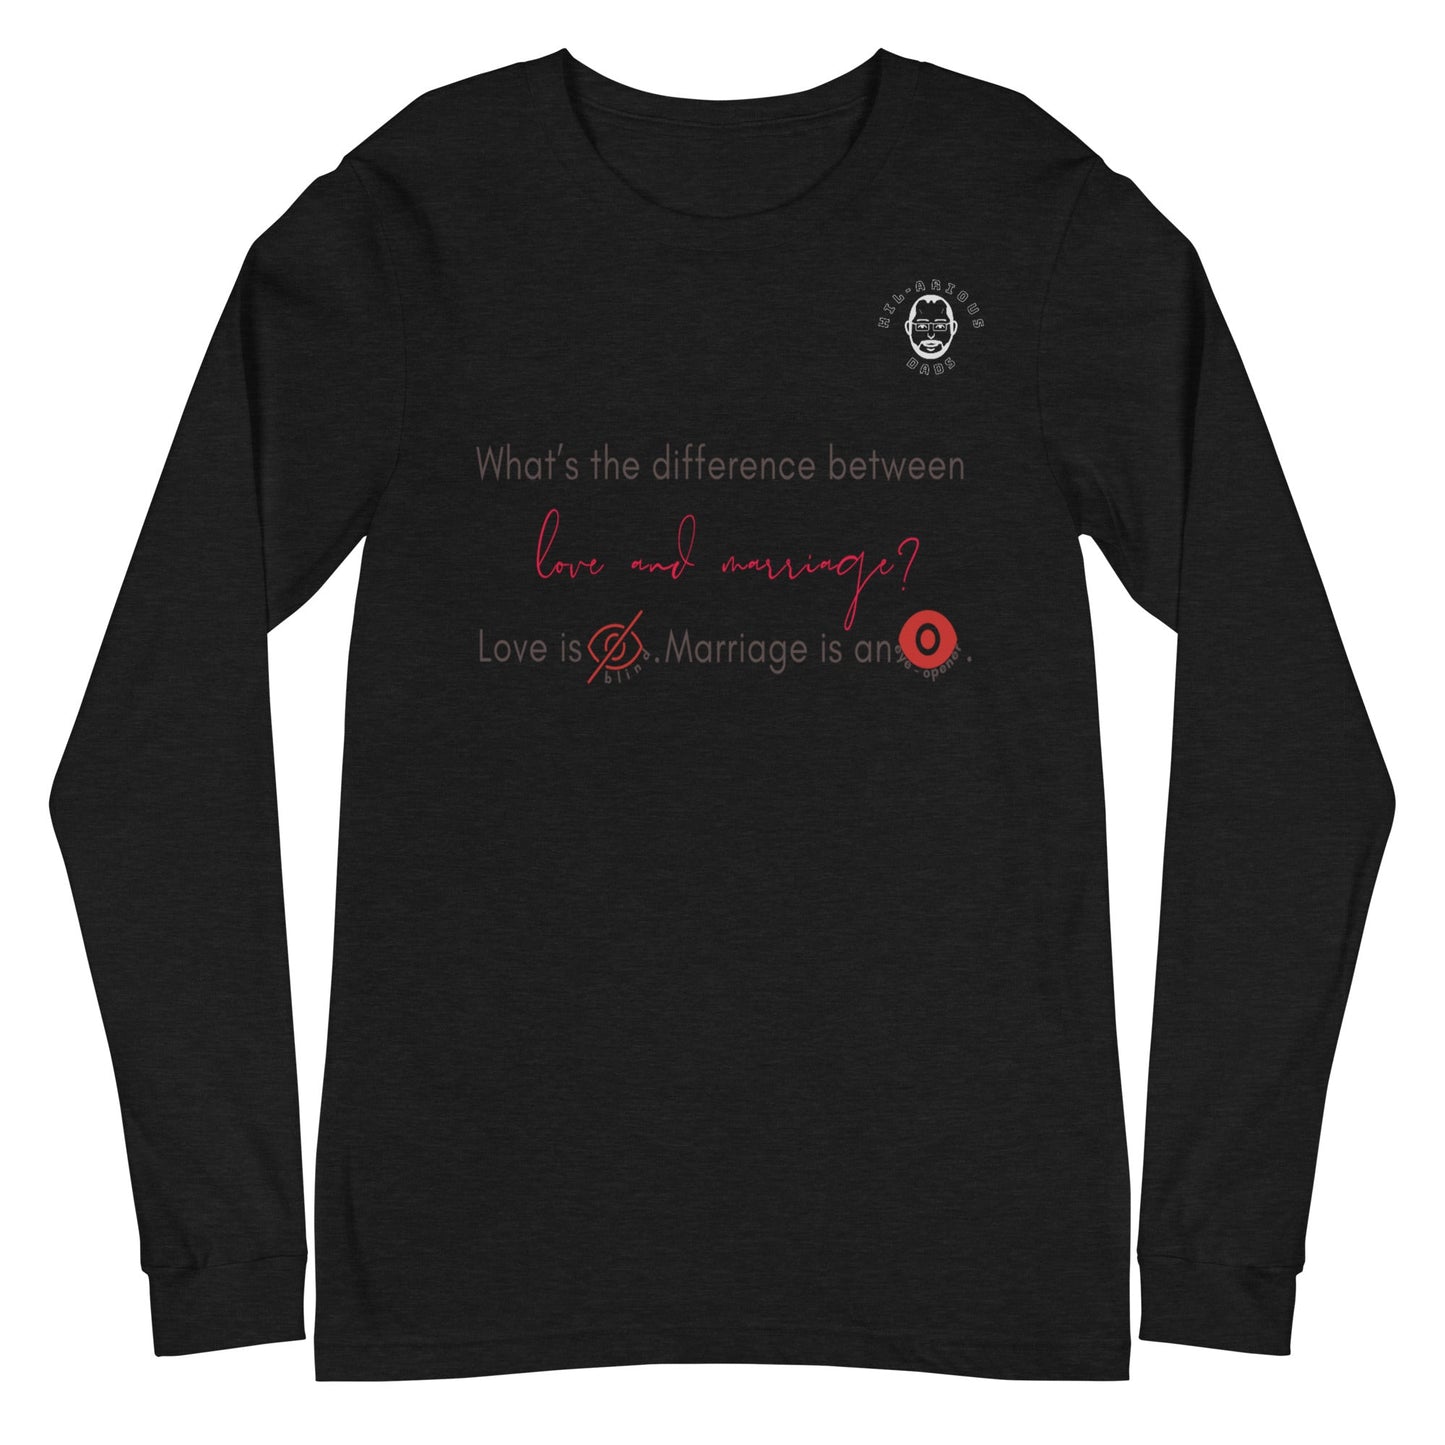 What’s the difference between love and marriage?-Long Sleeve Tee - Hil-arious Dads